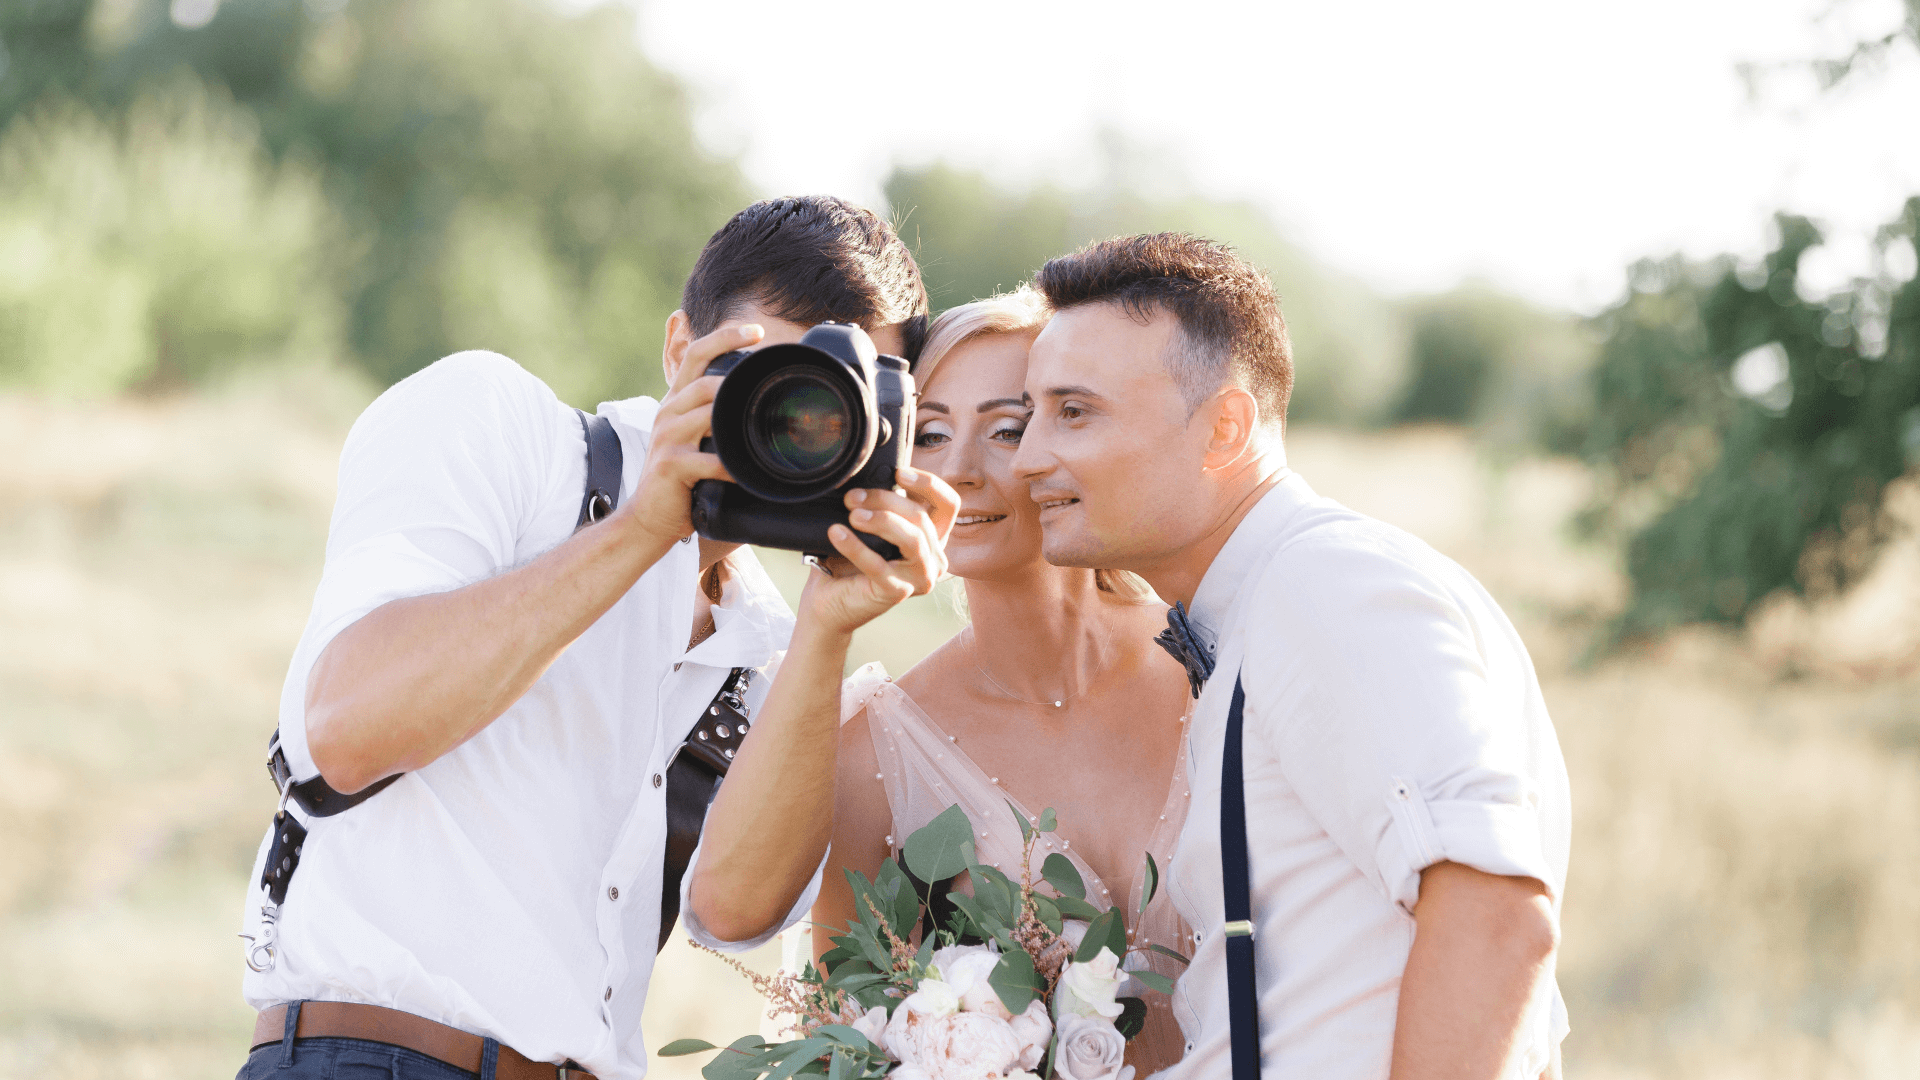 25 best gifts for wedding photographer